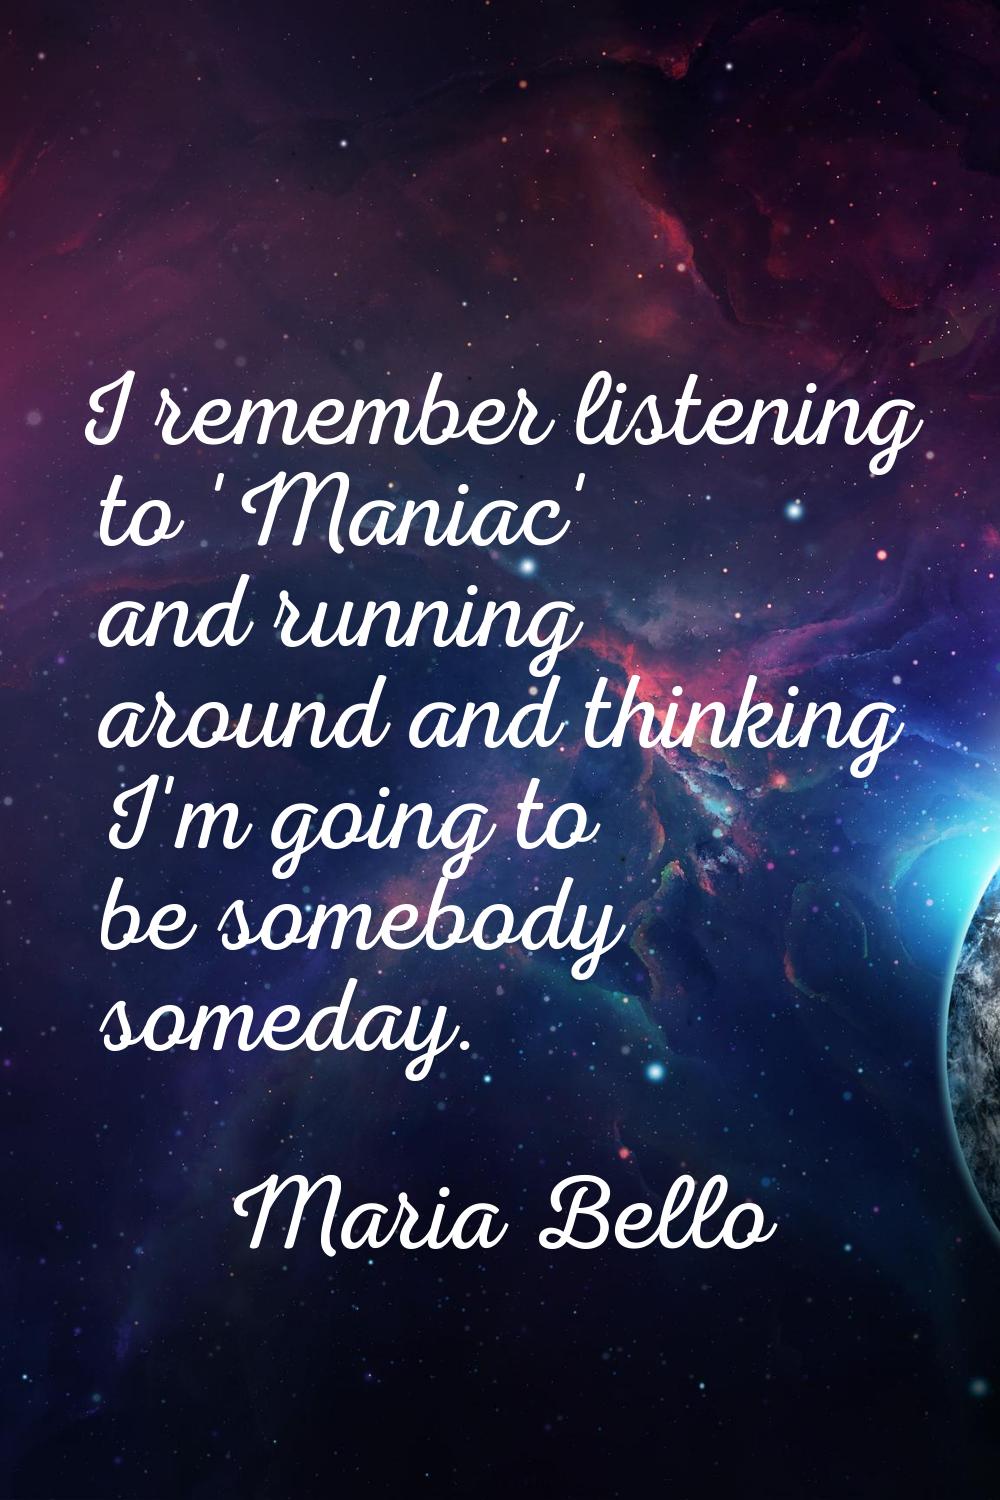 I remember listening to 'Maniac' and running around and thinking I'm going to be somebody someday.